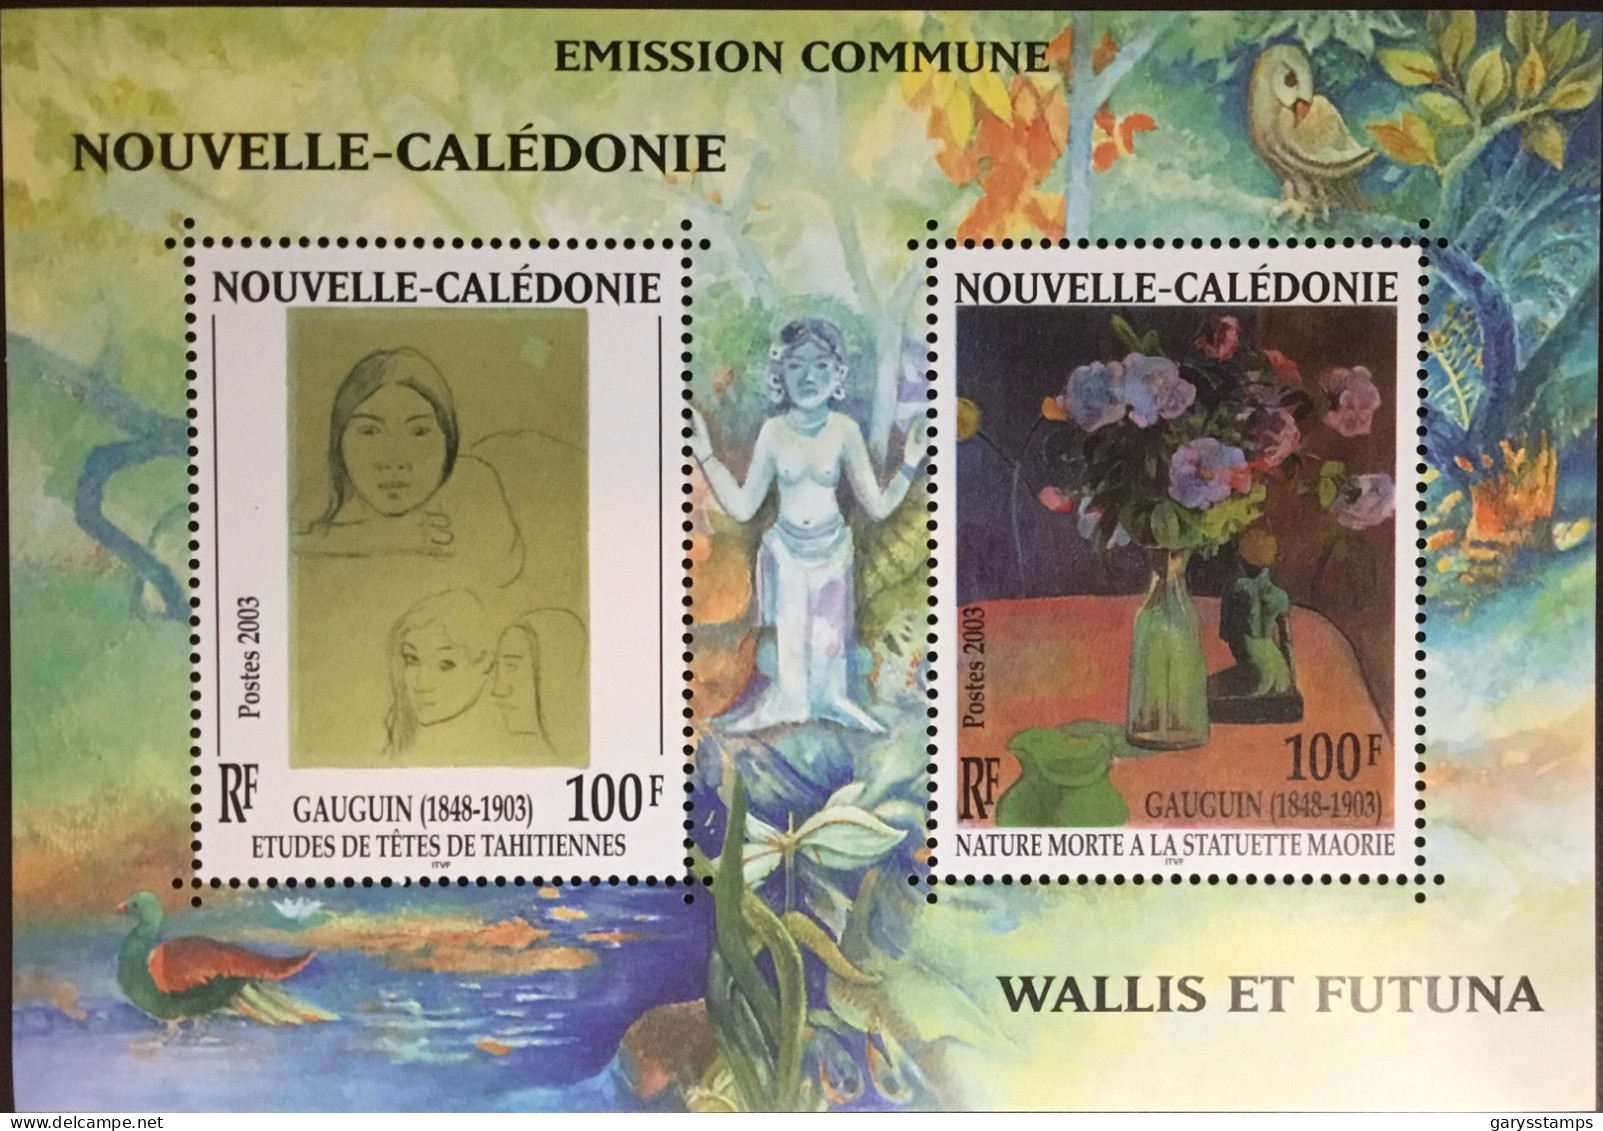 New Caledonia Caledonie 2003 Gauguin Centenary Joint Issue Minisheet MNH - Unused Stamps